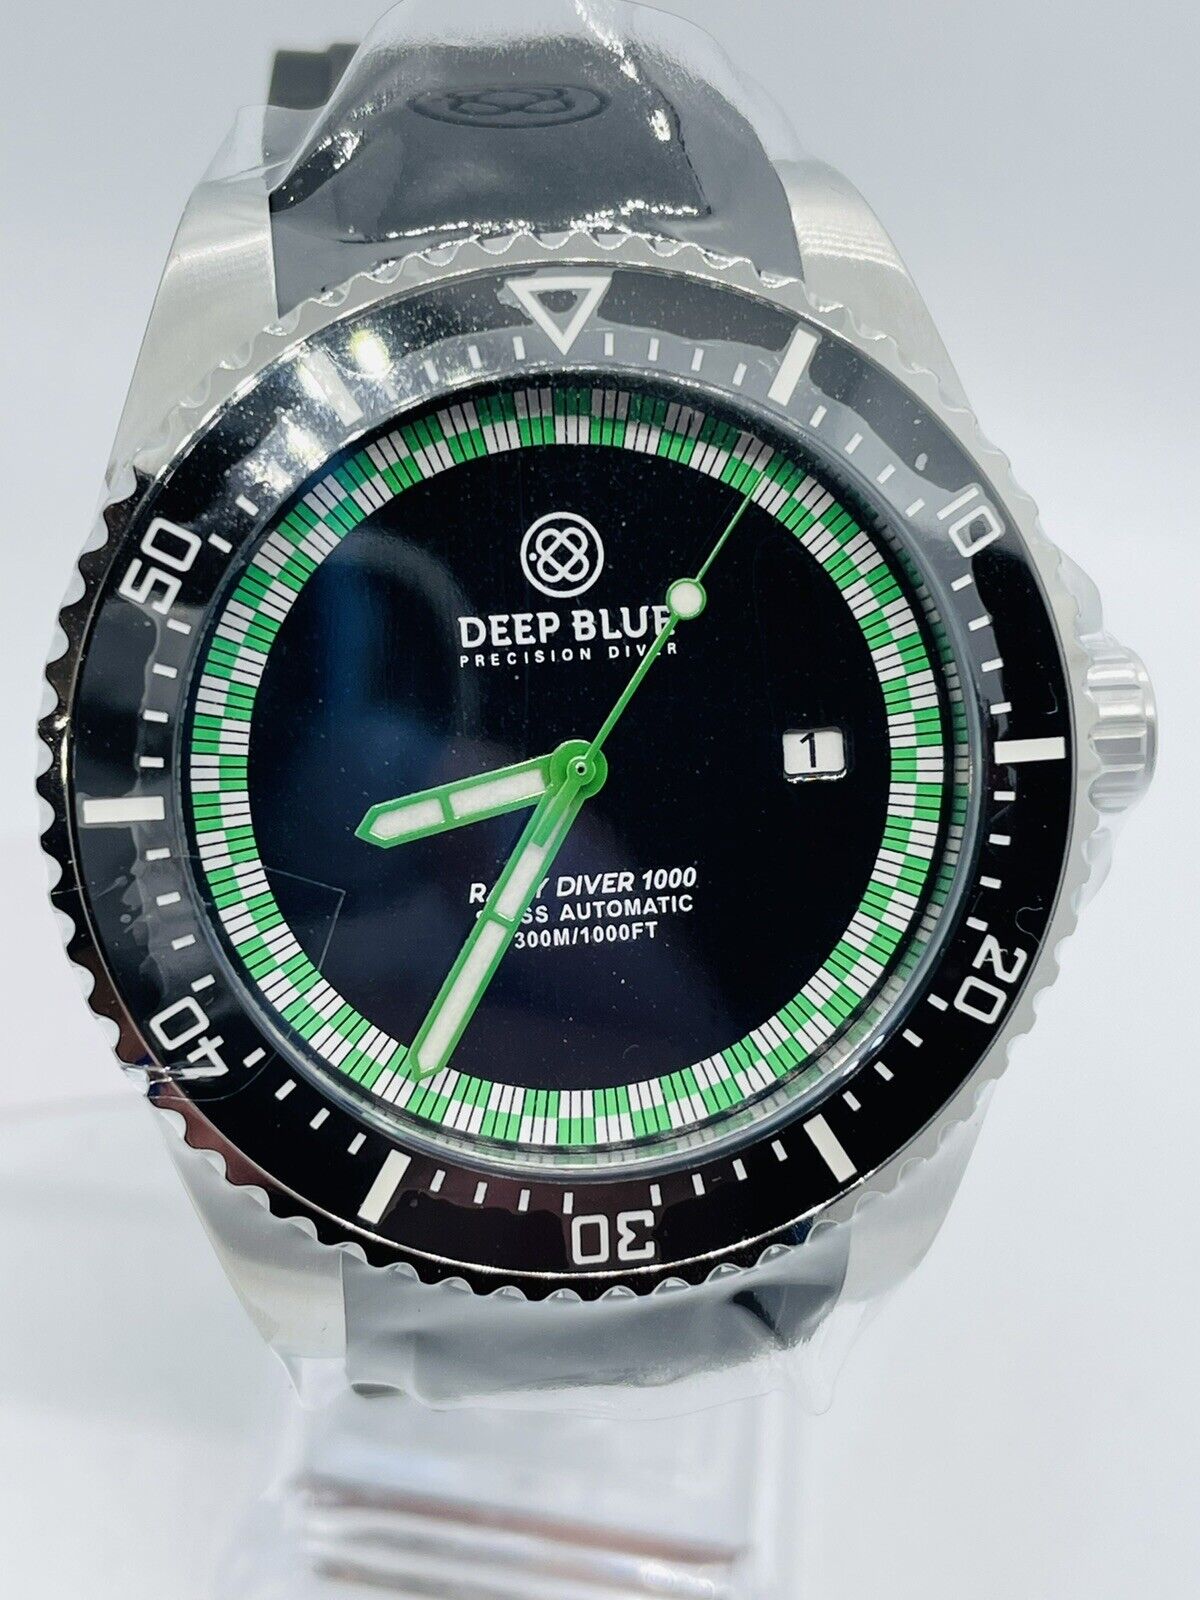 DEEP BLUE RALLY DIVER 1000 AUTO DIVE WATCH-BLACK/GREEN CHECKERED DIAL‼️